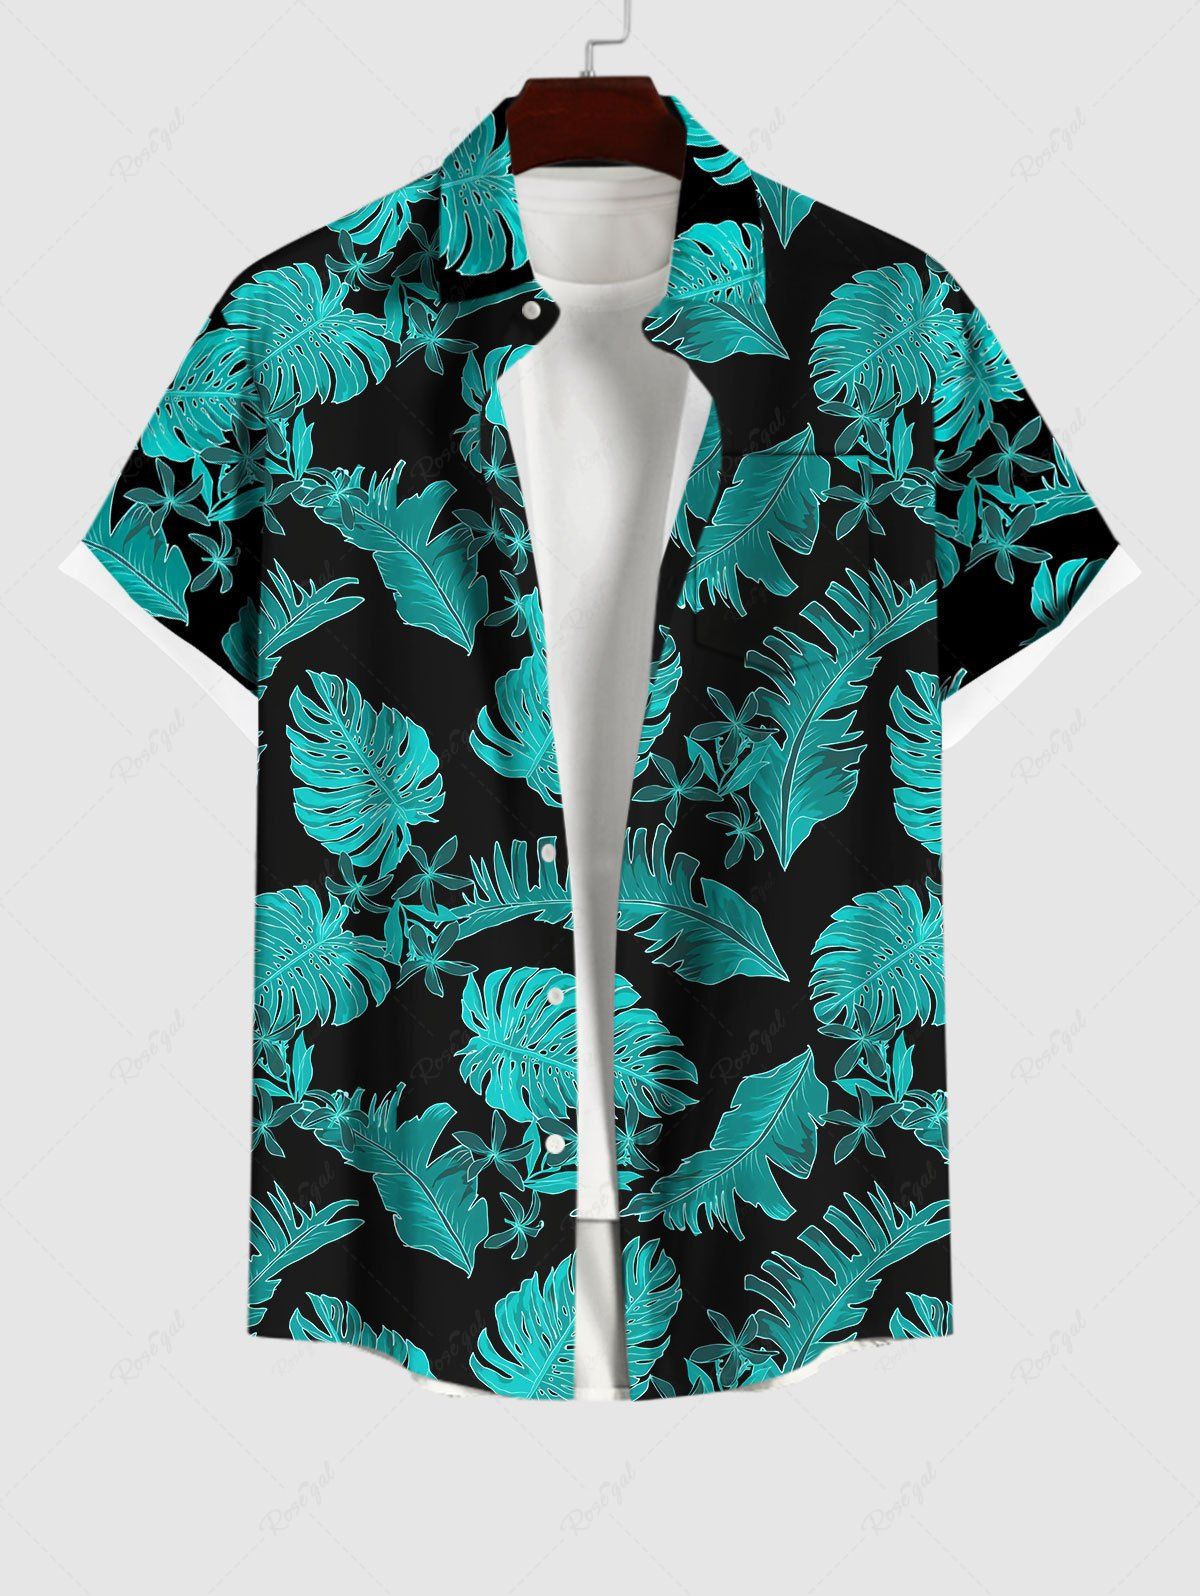 Outfits Hawaii Men's Turn-down Collar Coconut Tree Leaf Print Button Pocket Shirt  